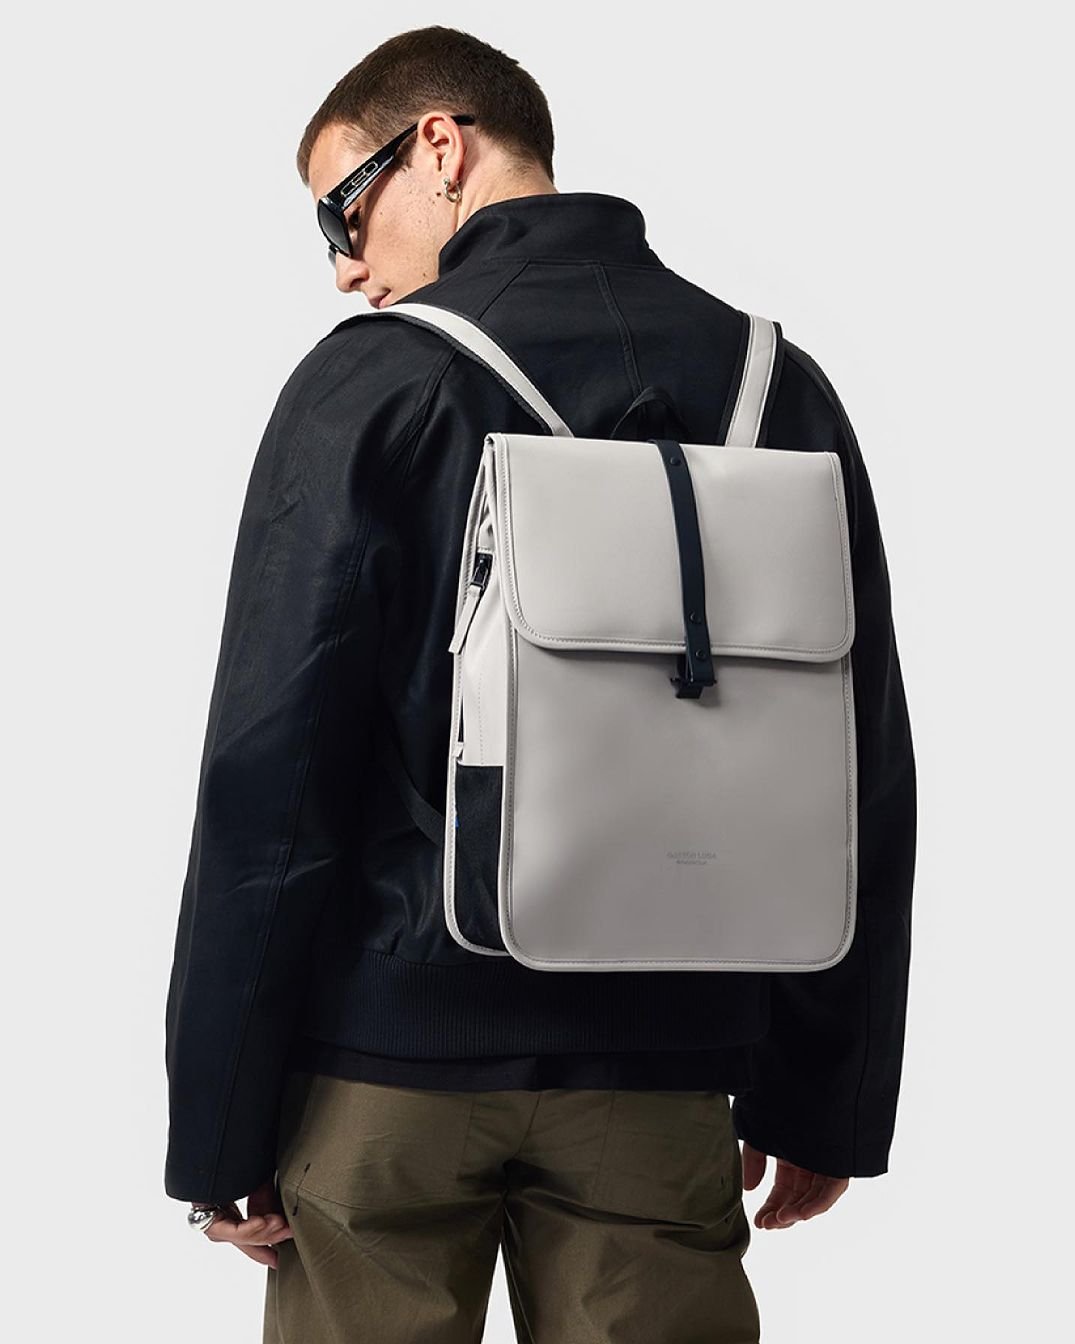 Däsh 13” backpack is a compact yet functional backpack for your daily commute or weekend getaway.It has a spacious main compartment, a dedicated laptop divider, and a zipped pocket for easy access to your smaller items. Available in all our online stores at gastonluga.com #gastonluga